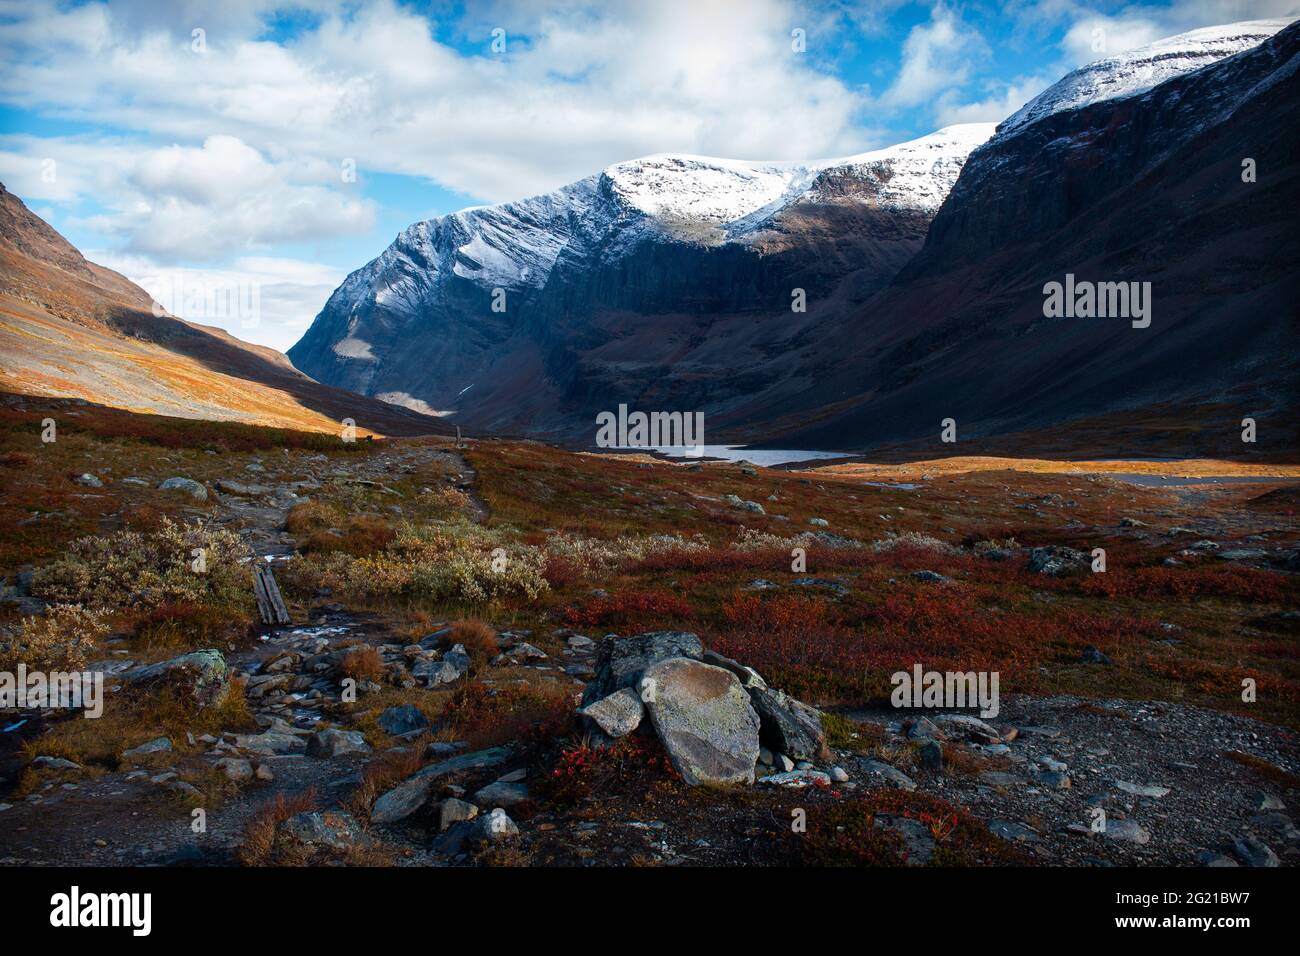 A rocky path connecting Kungsleden trail and Kebnekaise Mountain Station, Lapland, Sweden, September 2020 Stock Photo